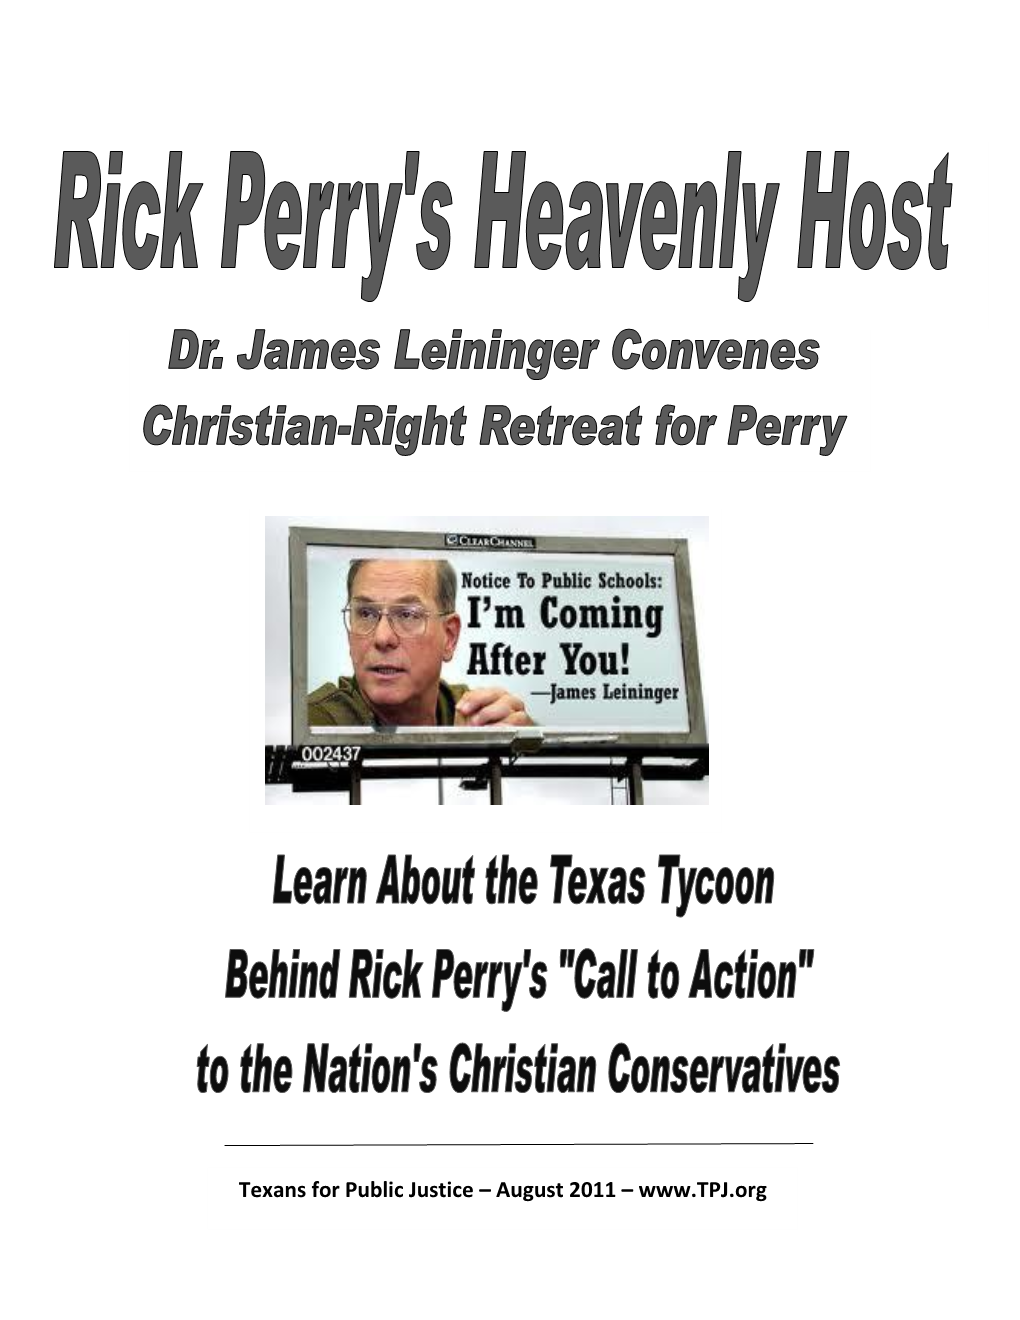 James Leininger Convenes Christian-Right Retreat for Perry